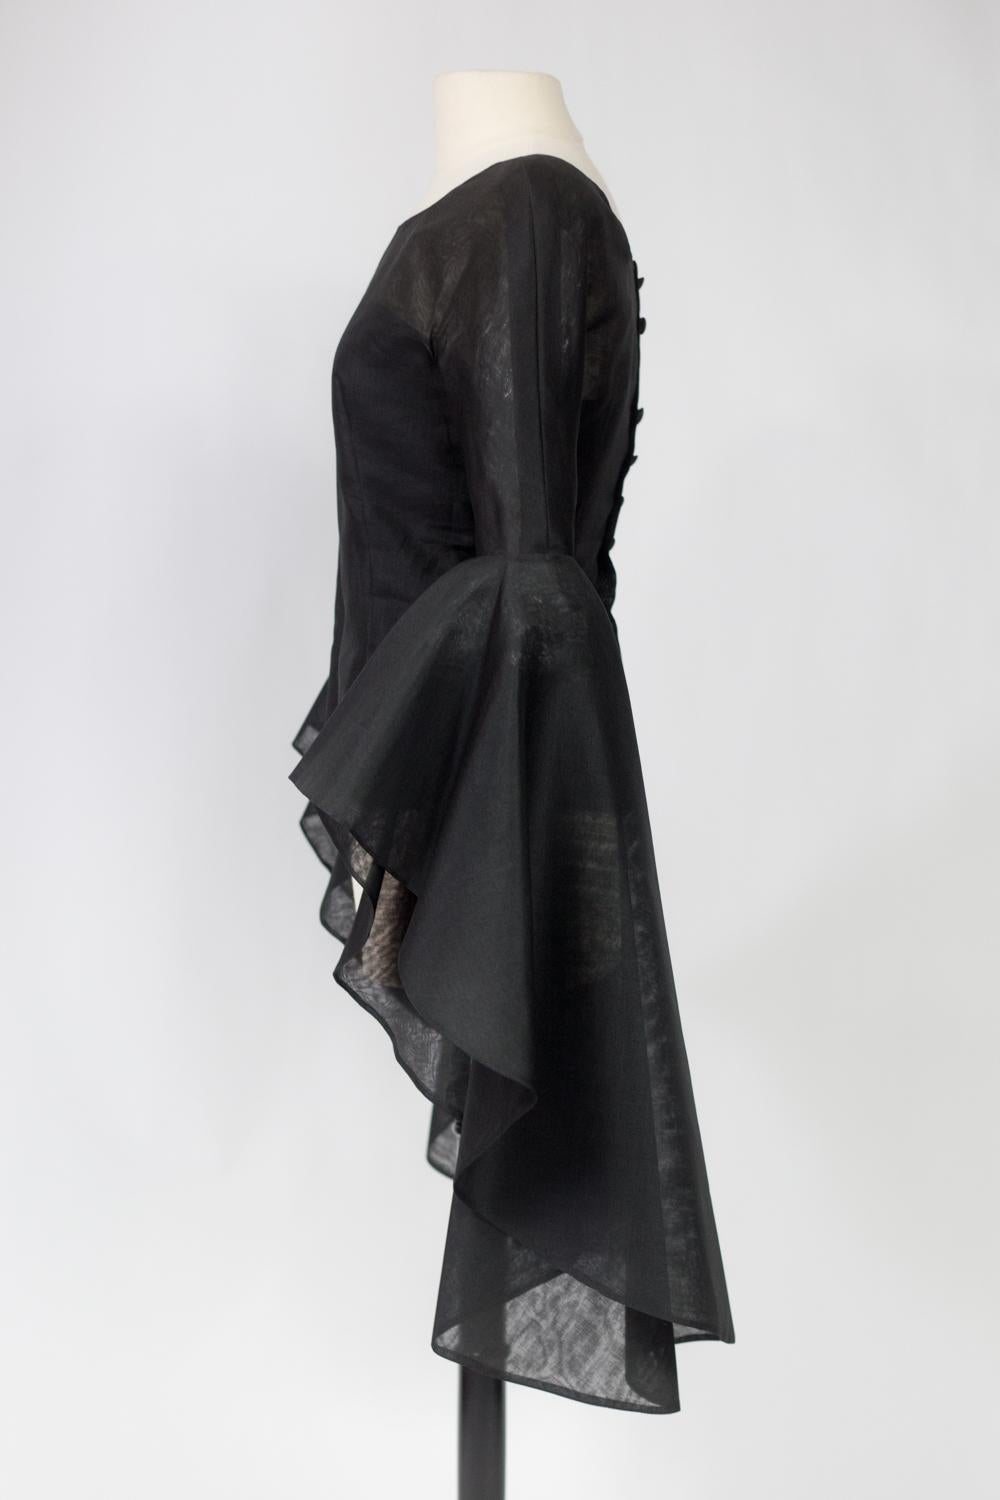 Women's A Pierre Cardin Organza Blouse With Dramatic Batwing Sleeves Circa 1970/1980 For Sale